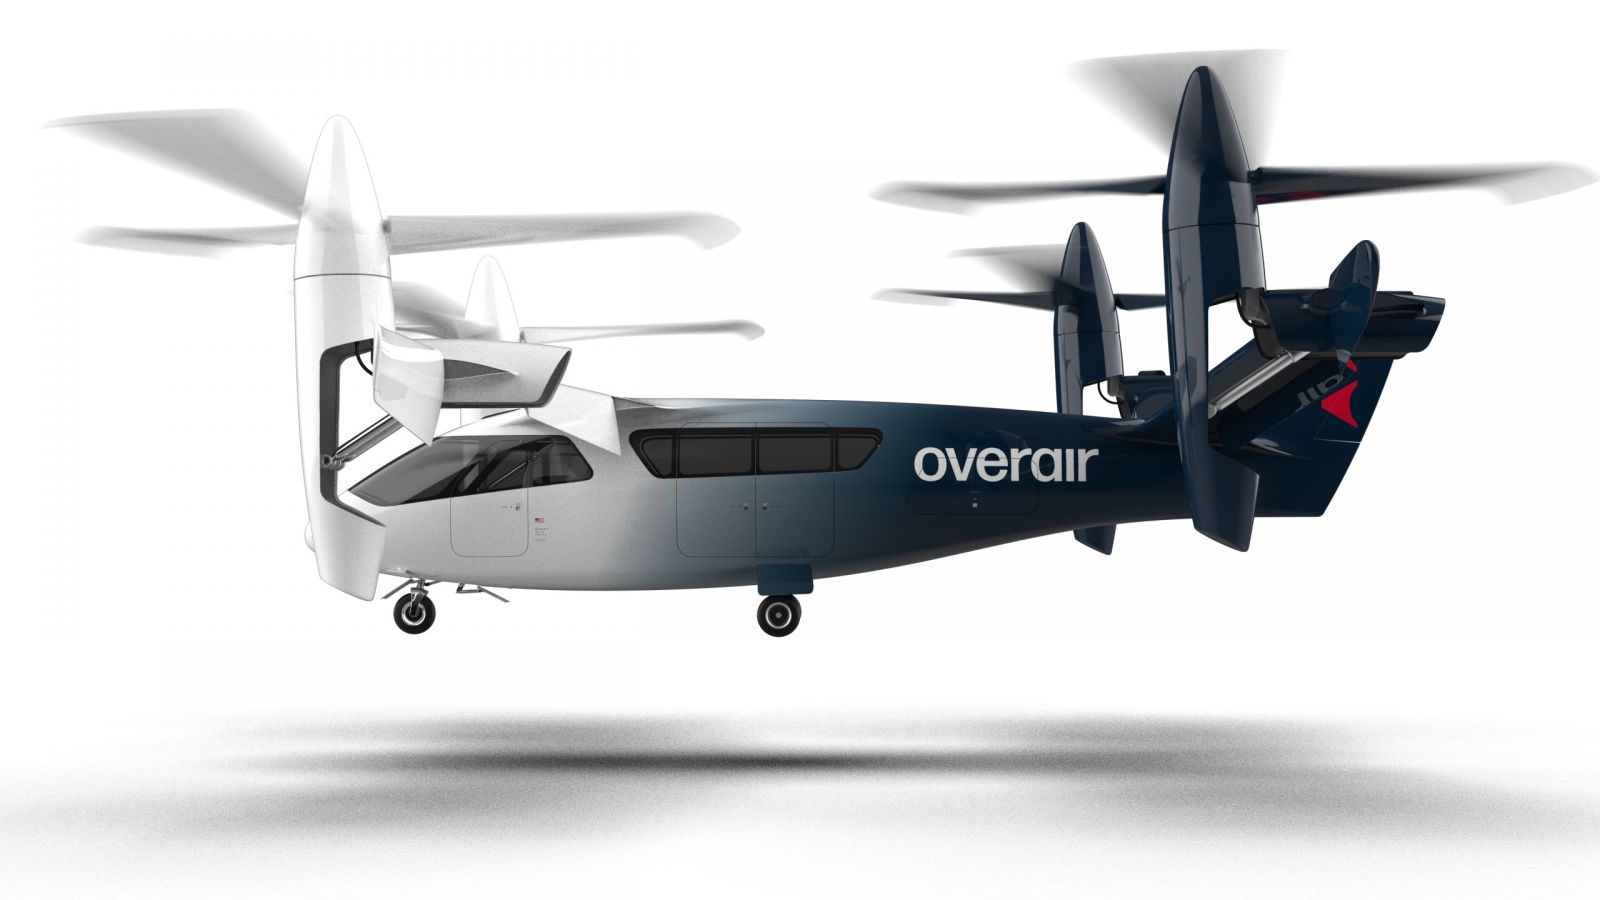 Overair experimental prototype Butterfly will take flight in 2023.